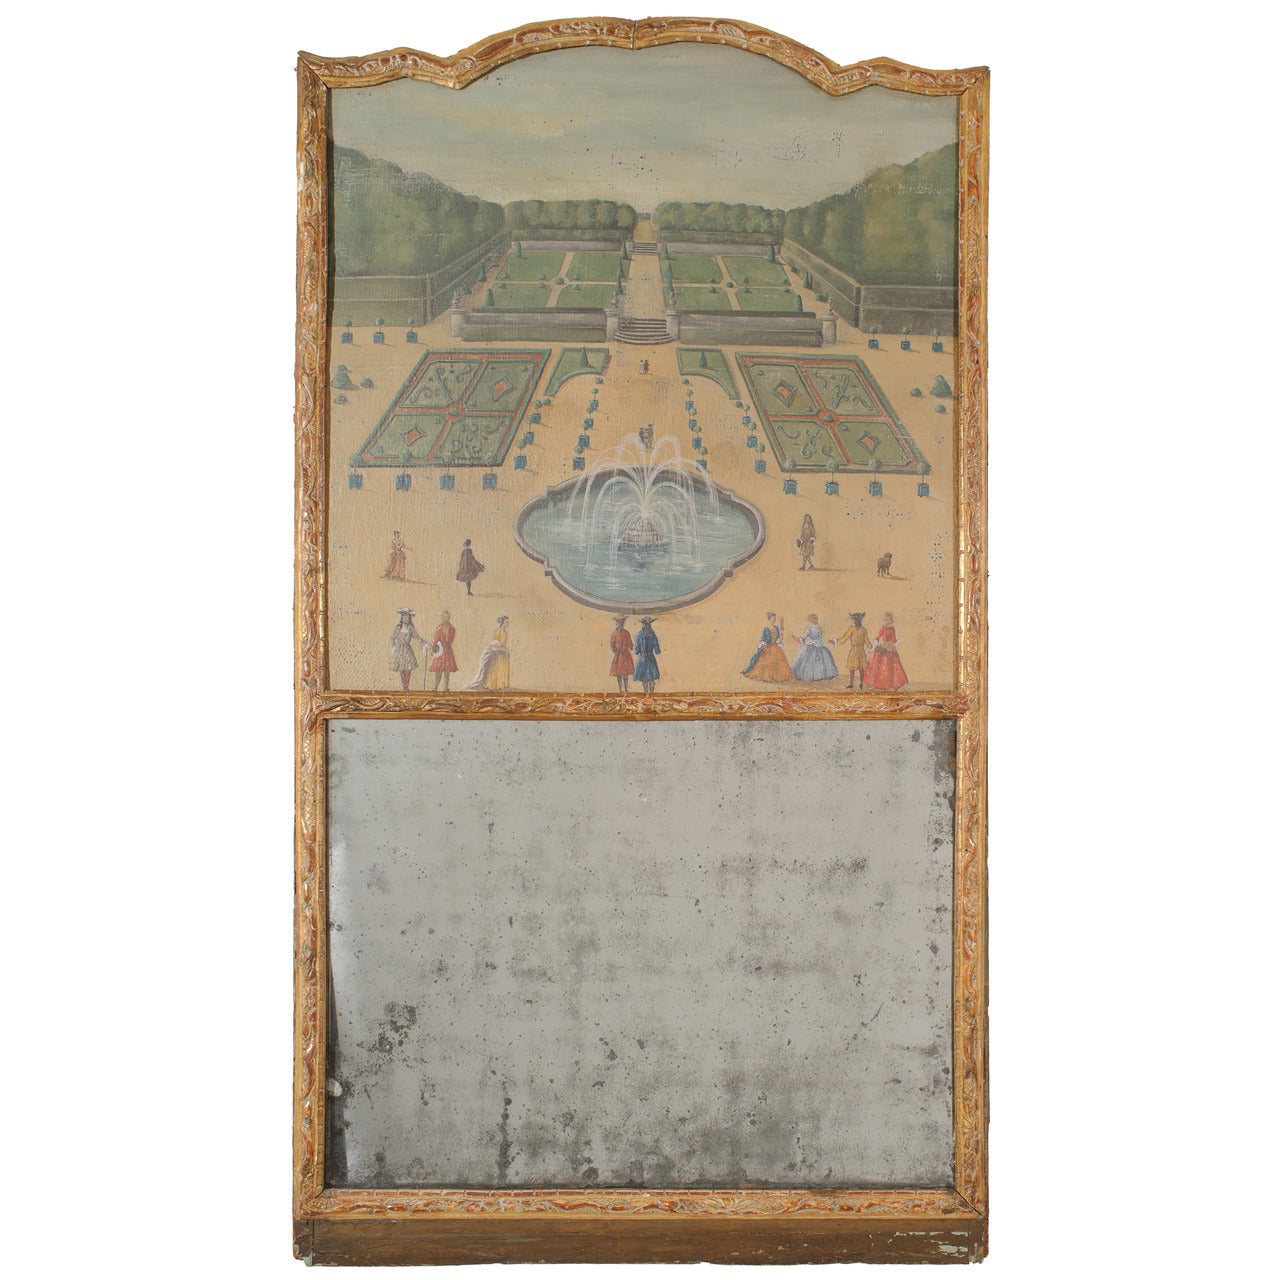 Regence Trumeau Mirror with Original Landscape Painting on Canvas, 1715-1730